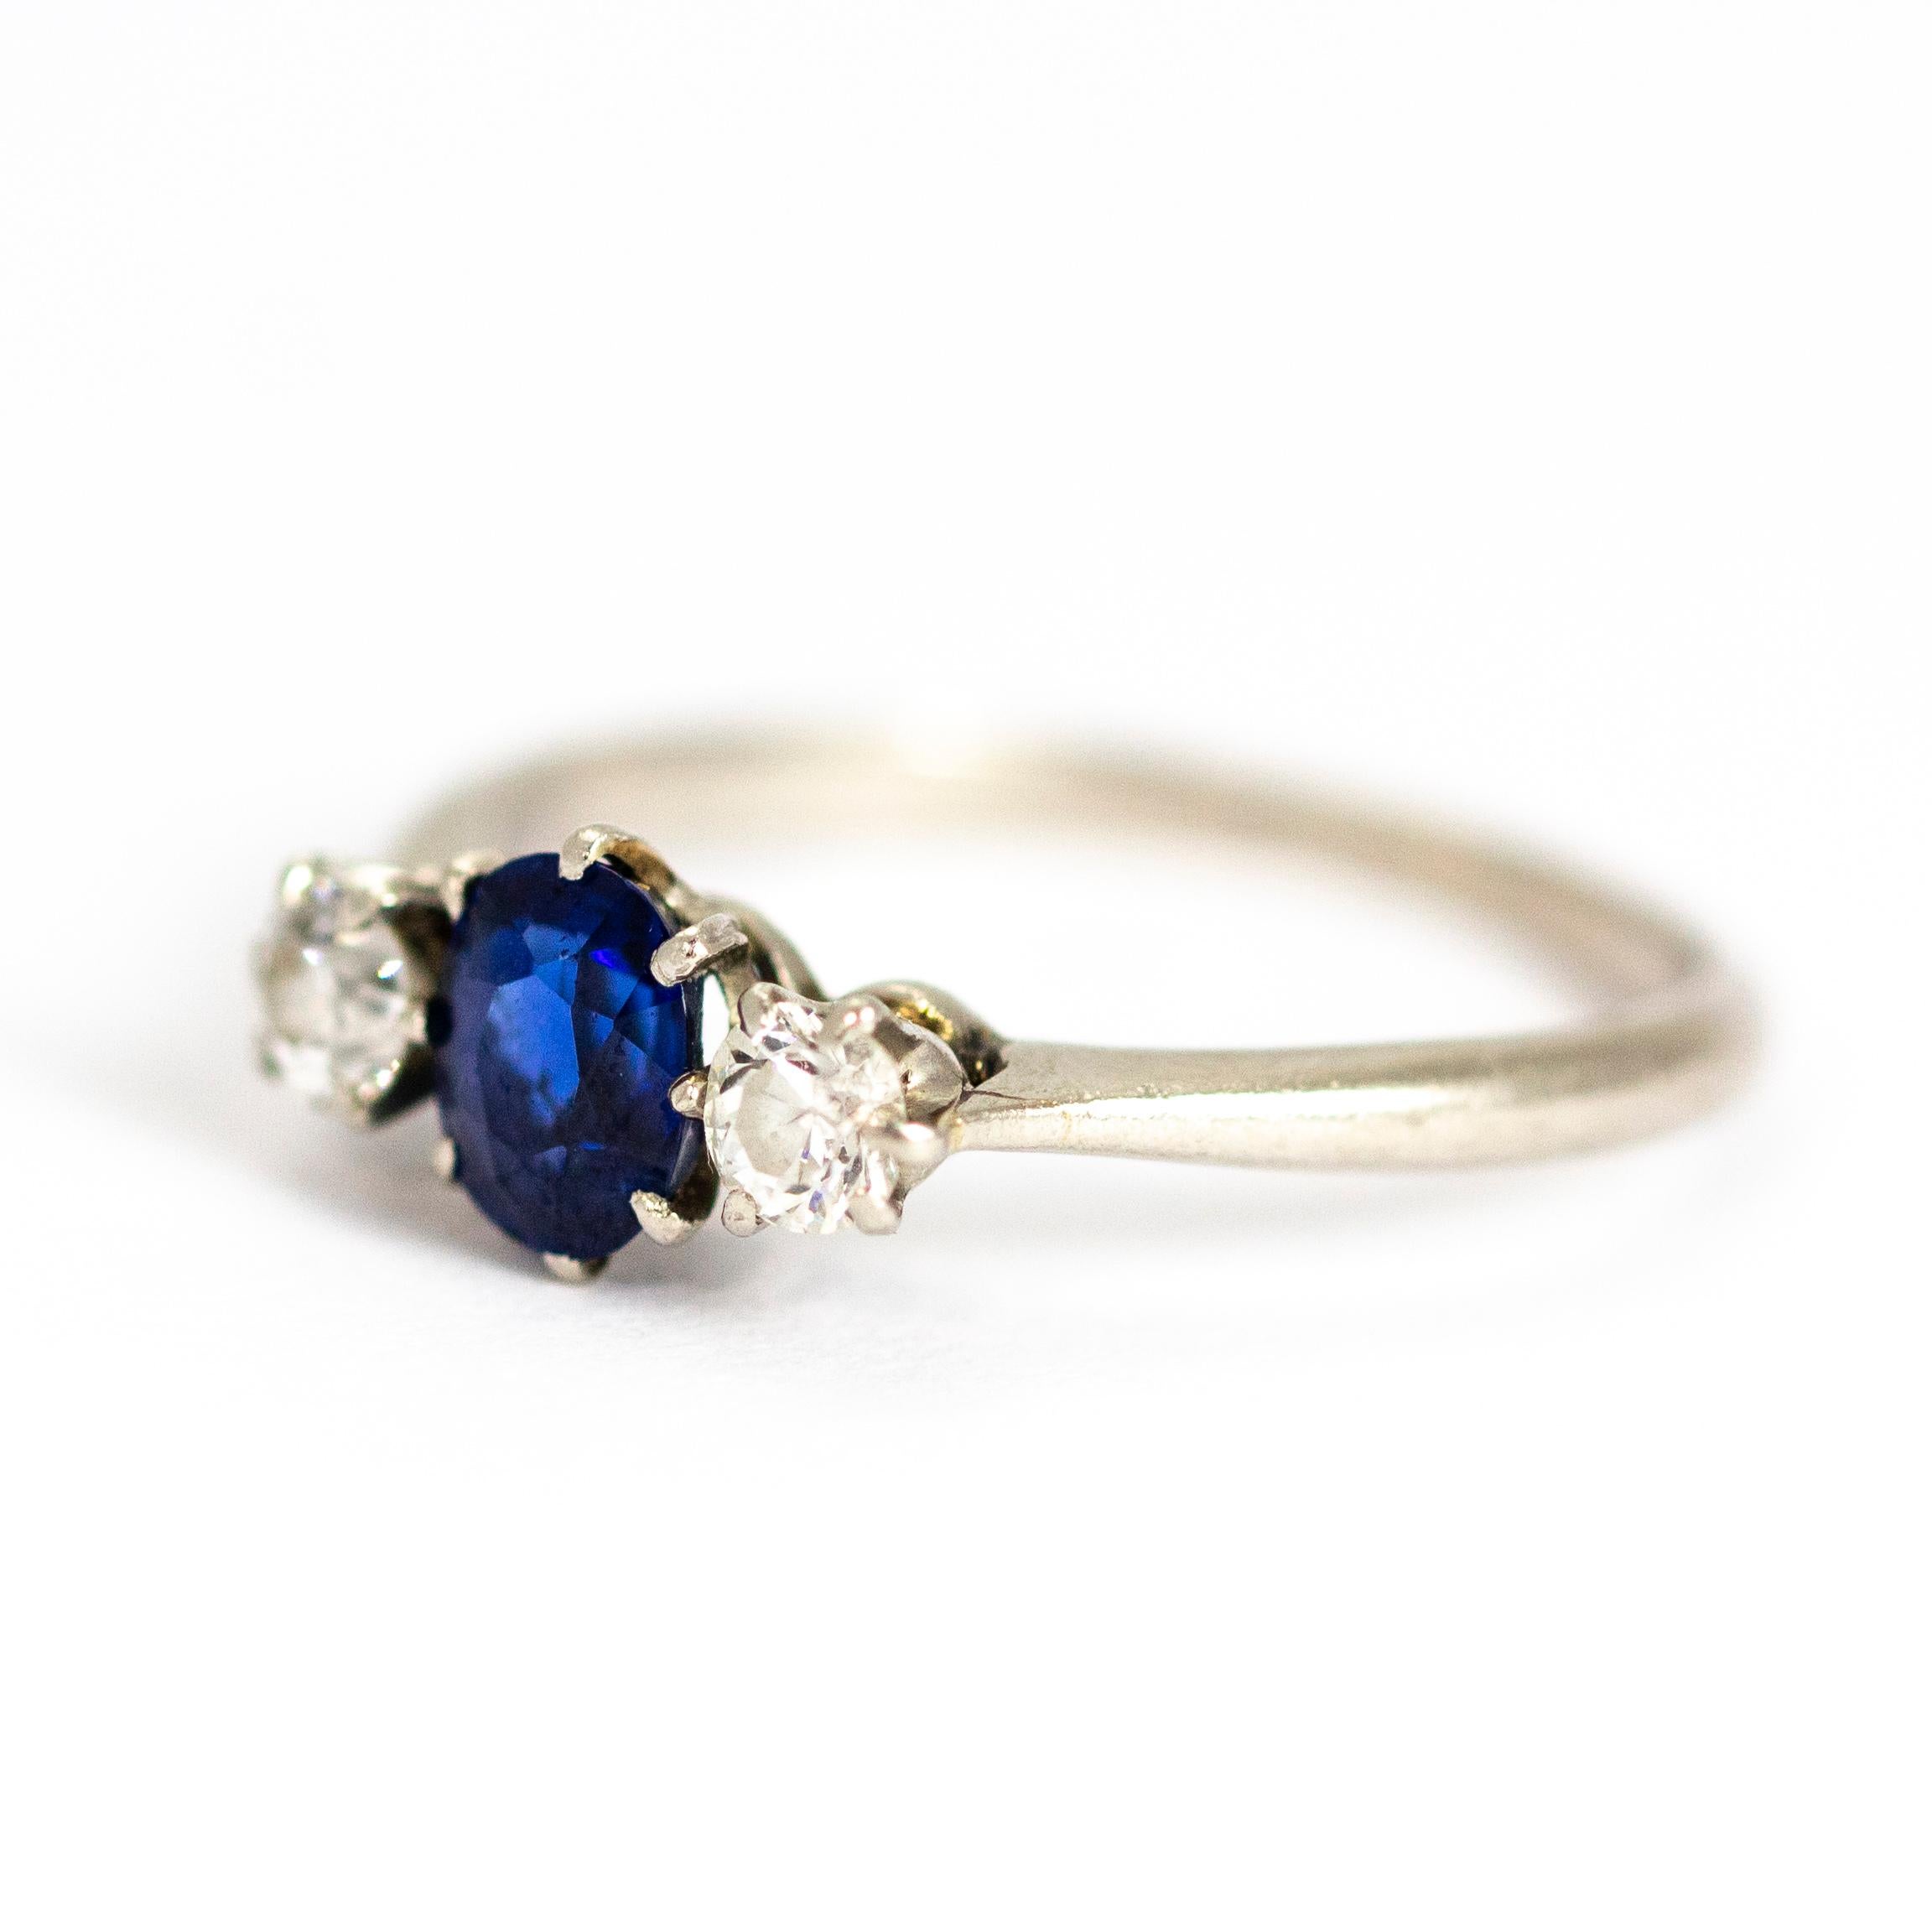 The oval sapphire in this ring has a wonderful blue glow to it and is sat between two smaller round cut diamonds. Classic and timeless in style, this three stone beauty could be worn alone or stacked. Modelled in platinum. 

Ring Size: J 1/2 or 5